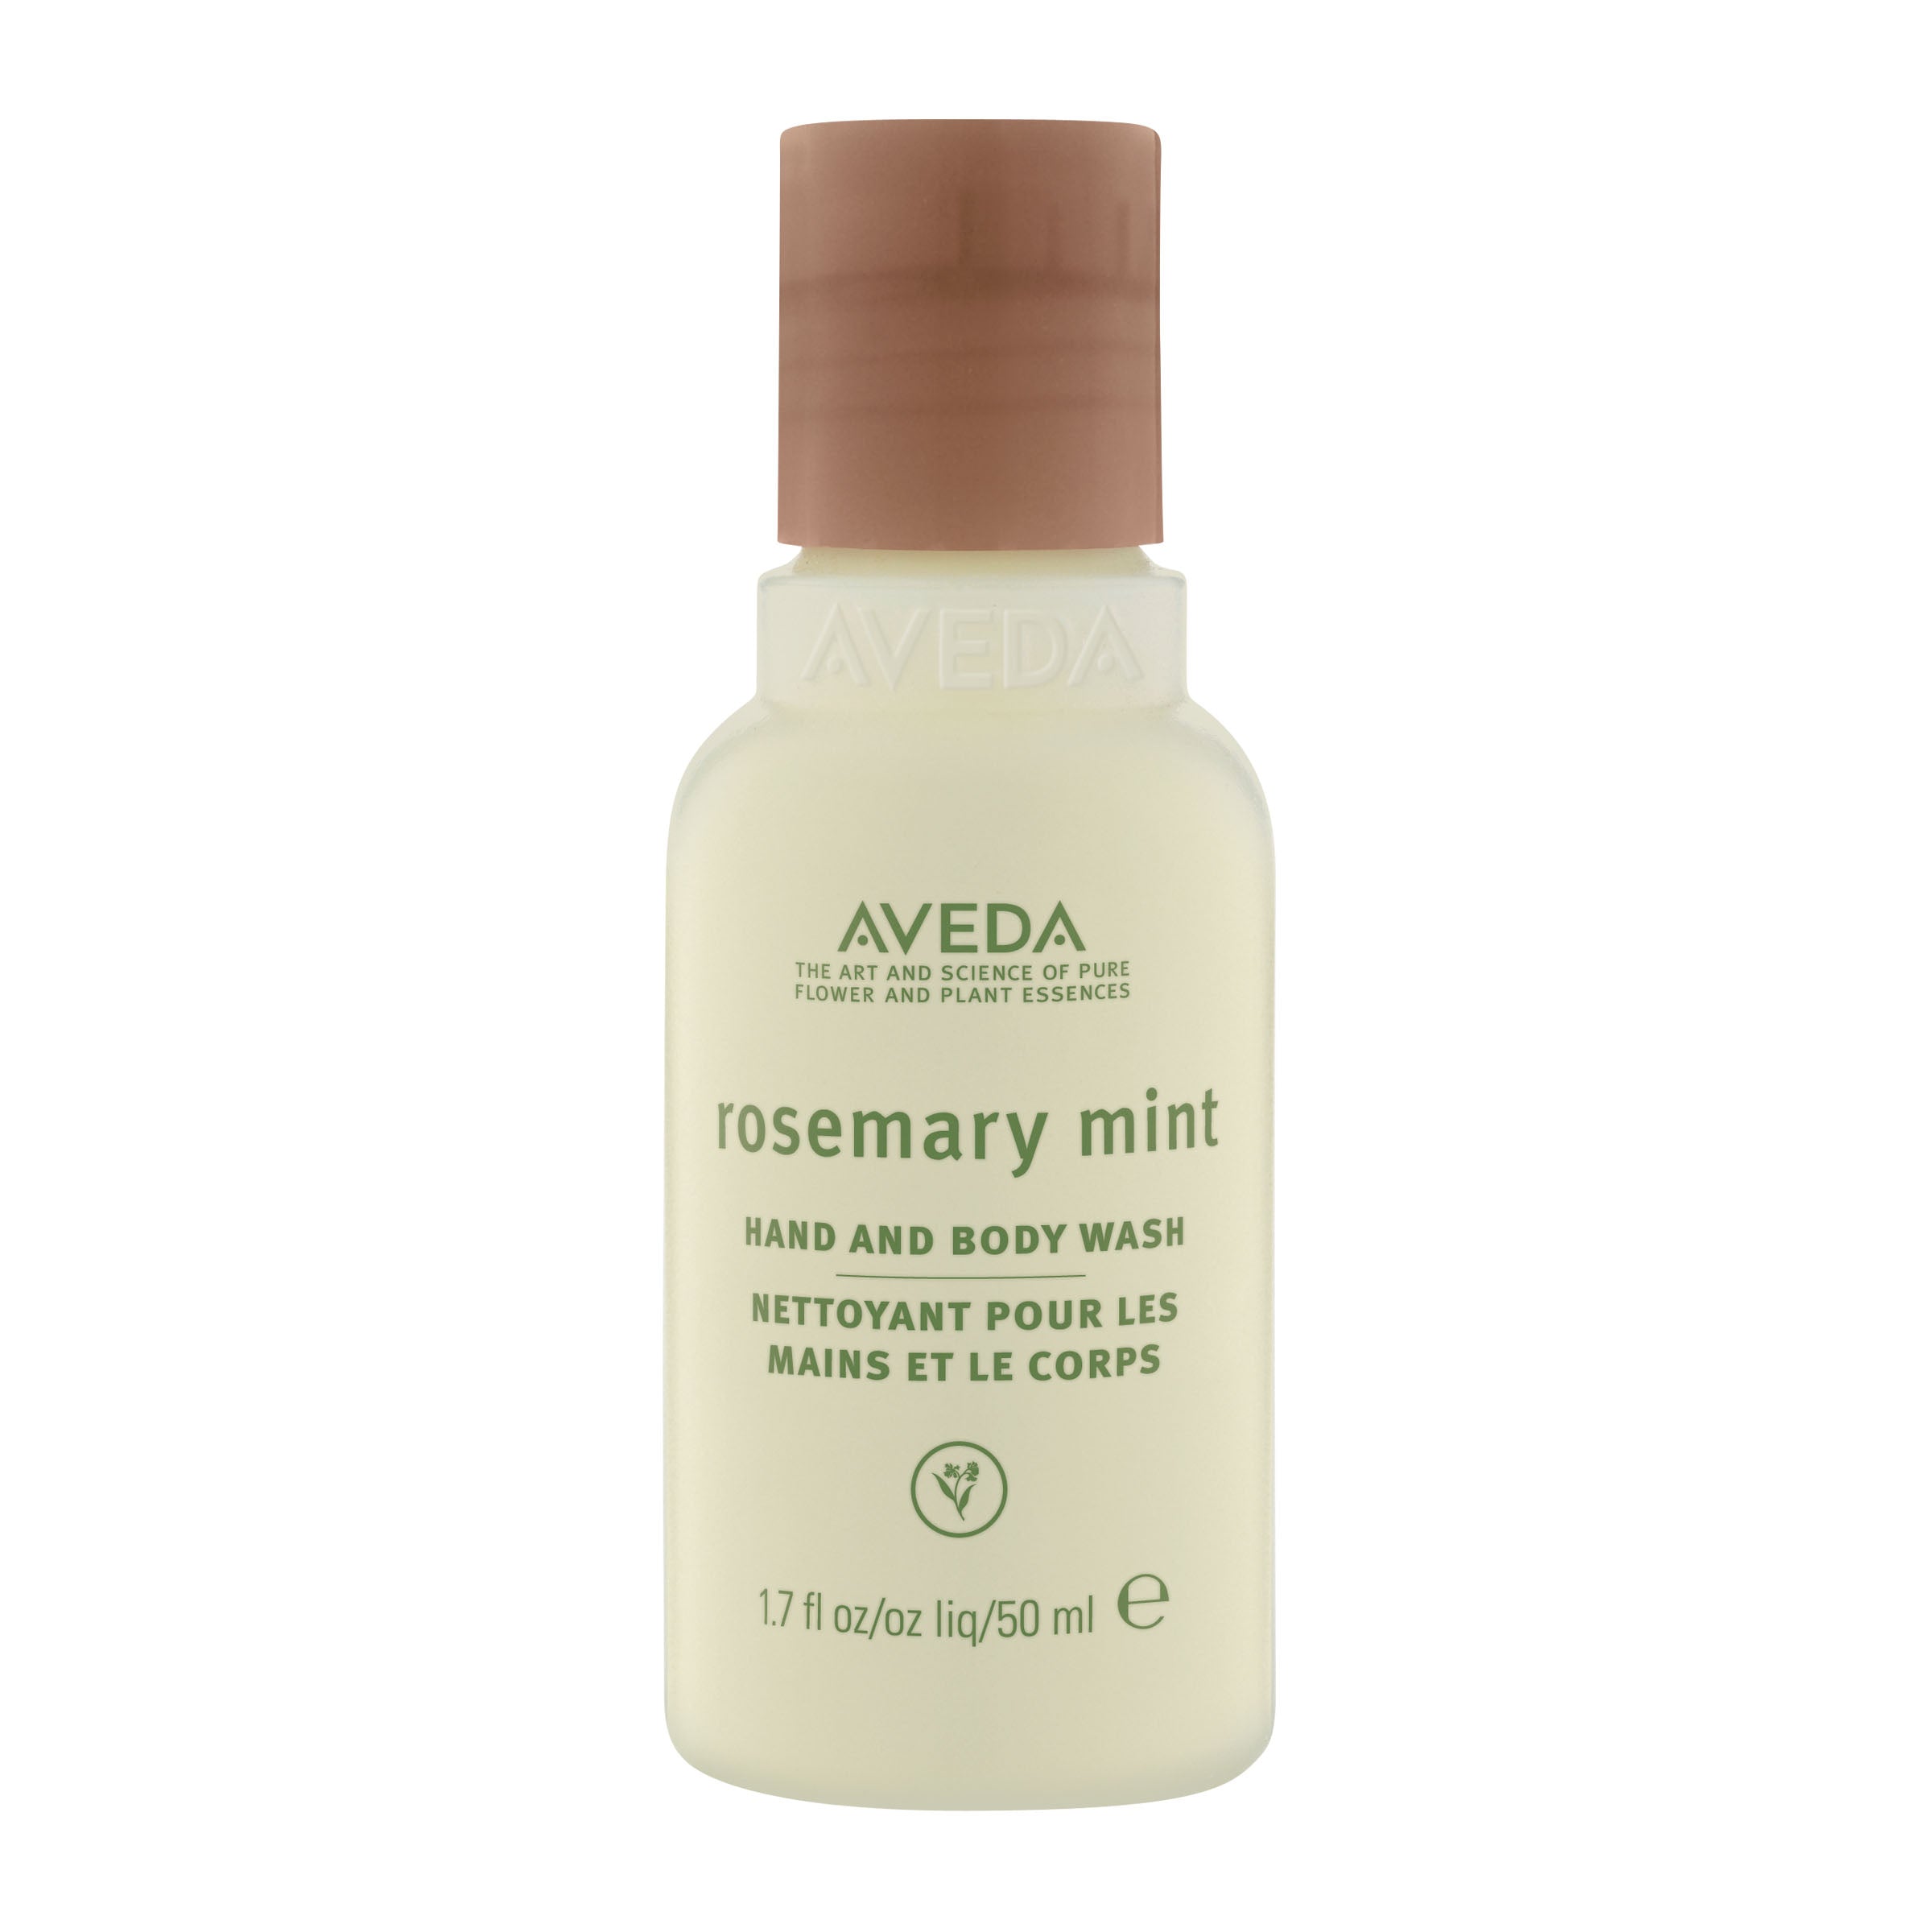 Aveda rosemary mint hand and body wash - travel size